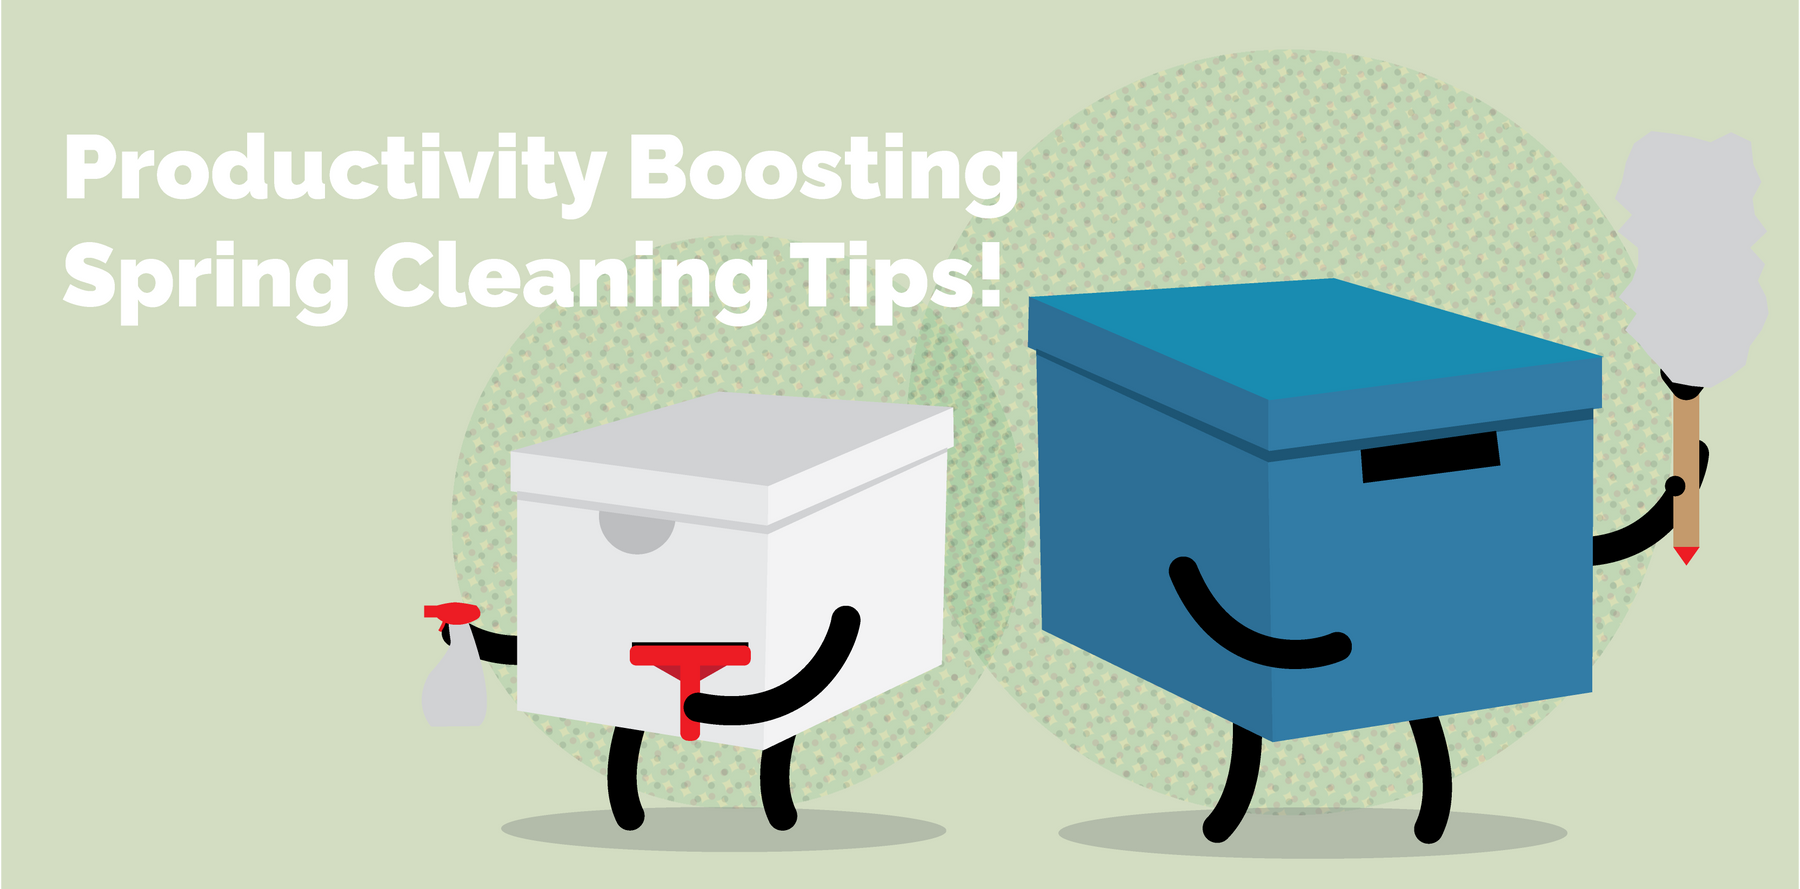 Maximise your productivity with these spring cleaning tips!